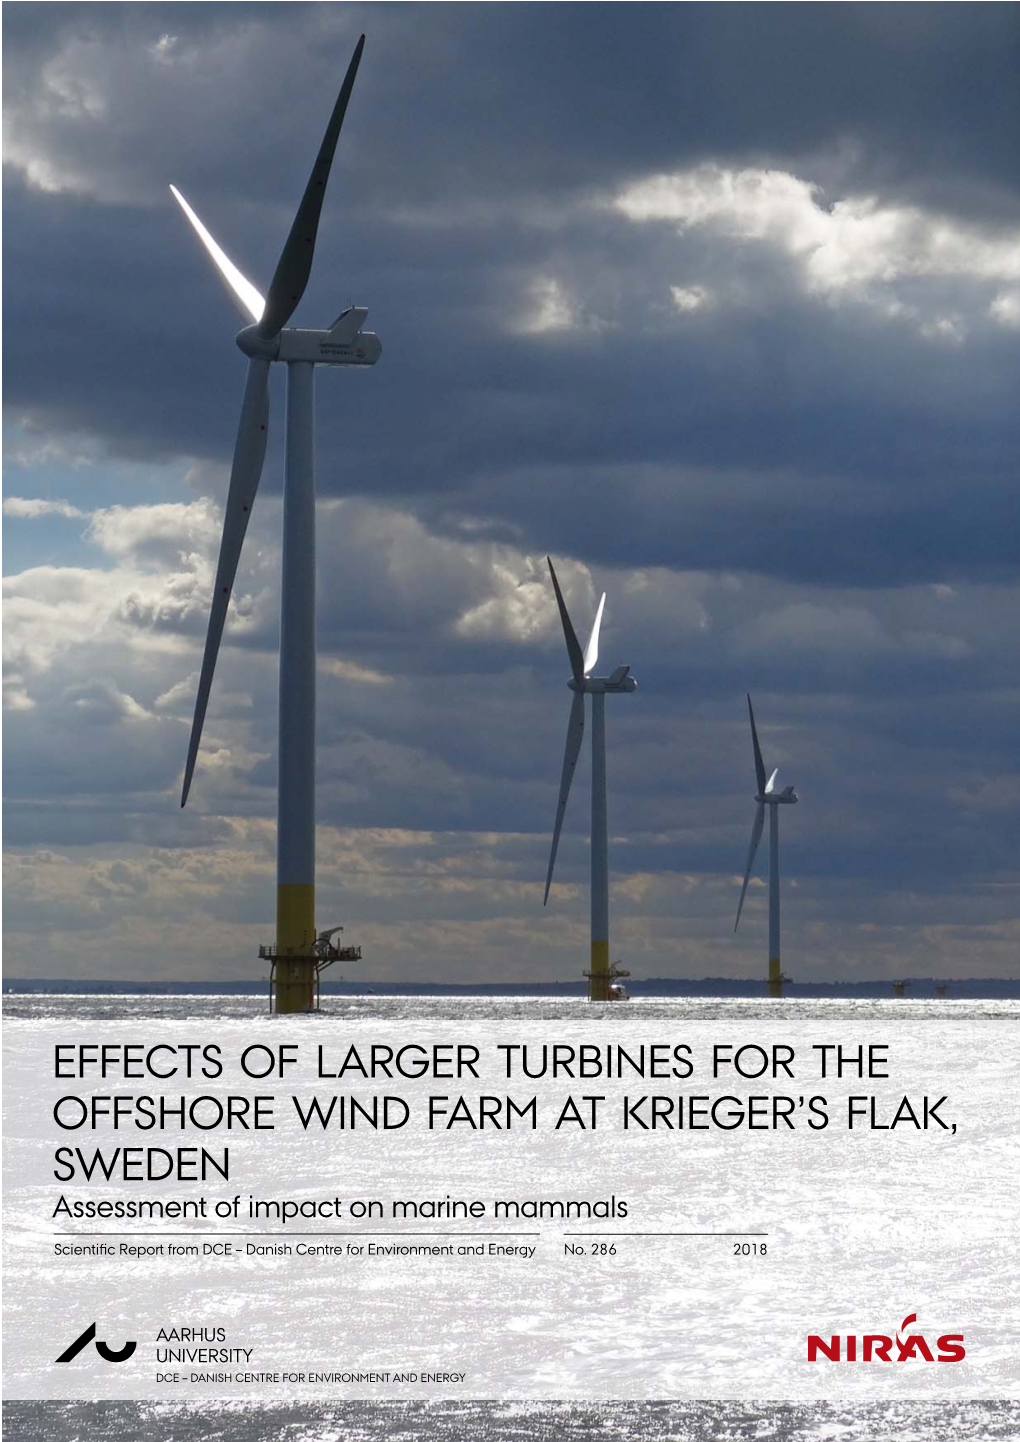 Effects of Larger Turbines for the Offshore Wind Farm at Krieger's Flak